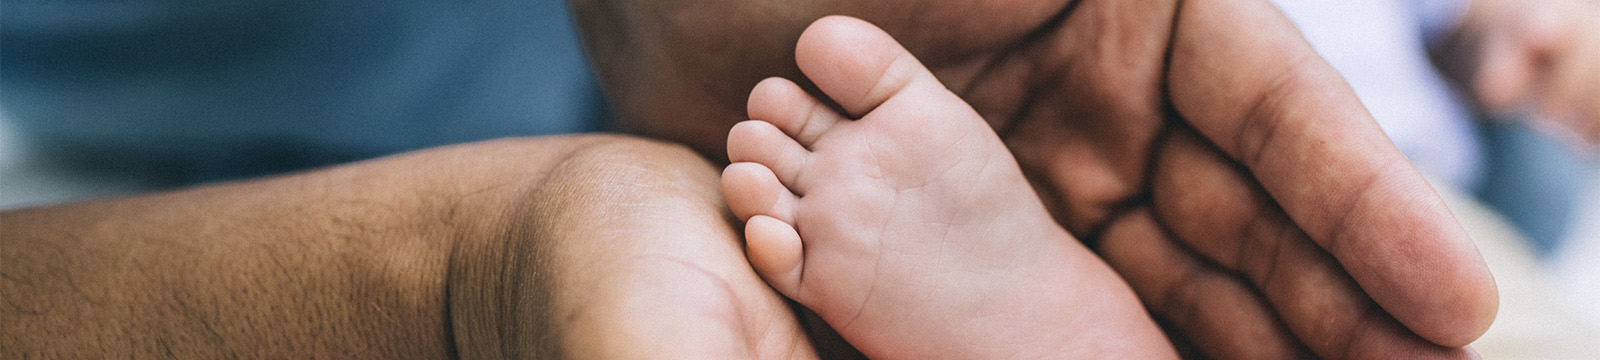 close up image of a father's hands holding newborn's foot.